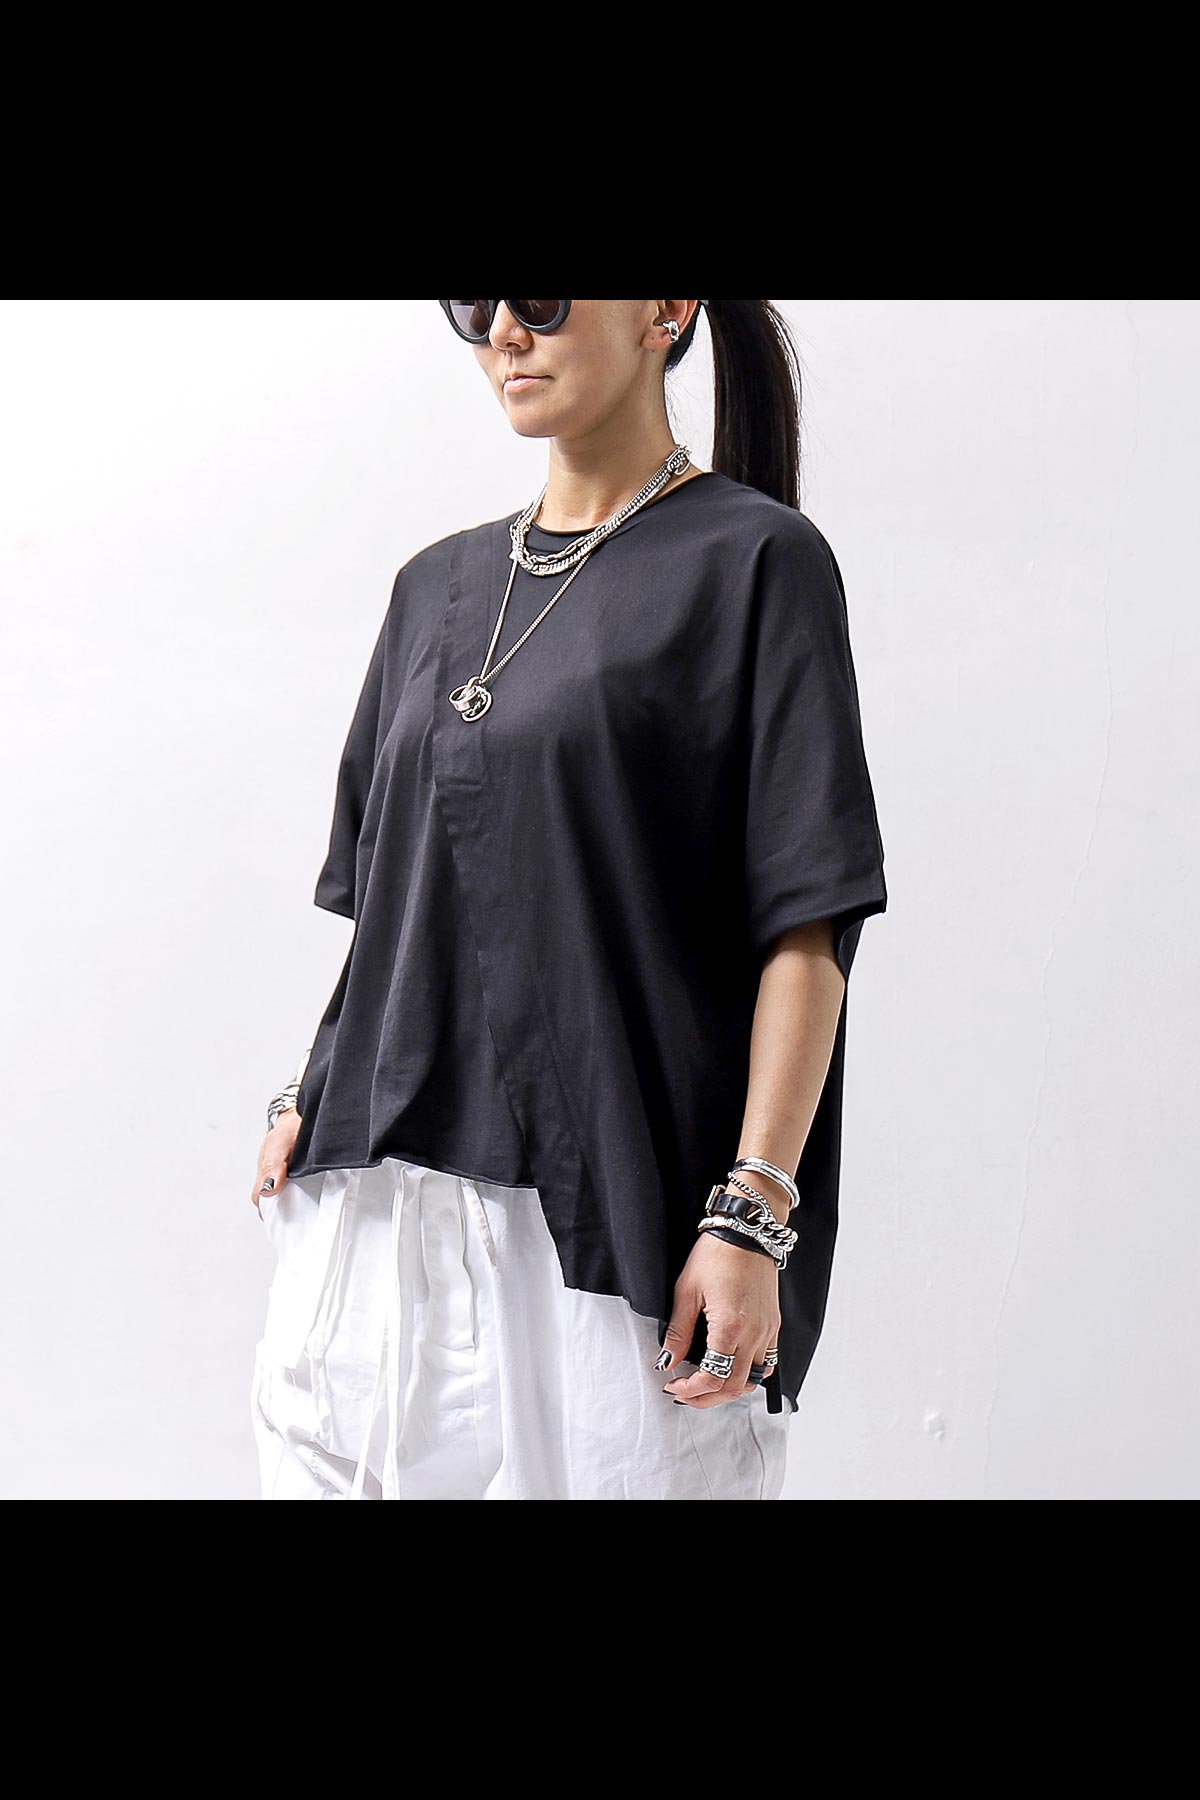 <img class='new_mark_img1' src='https://img.shop-pro.jp/img/new/icons8.gif' style='border:none;display:inline;margin:0px;padding:0px;width:auto;' />UNISEX COTTON HALF SLEEVE WIDE TOP BZB1679_BLACK